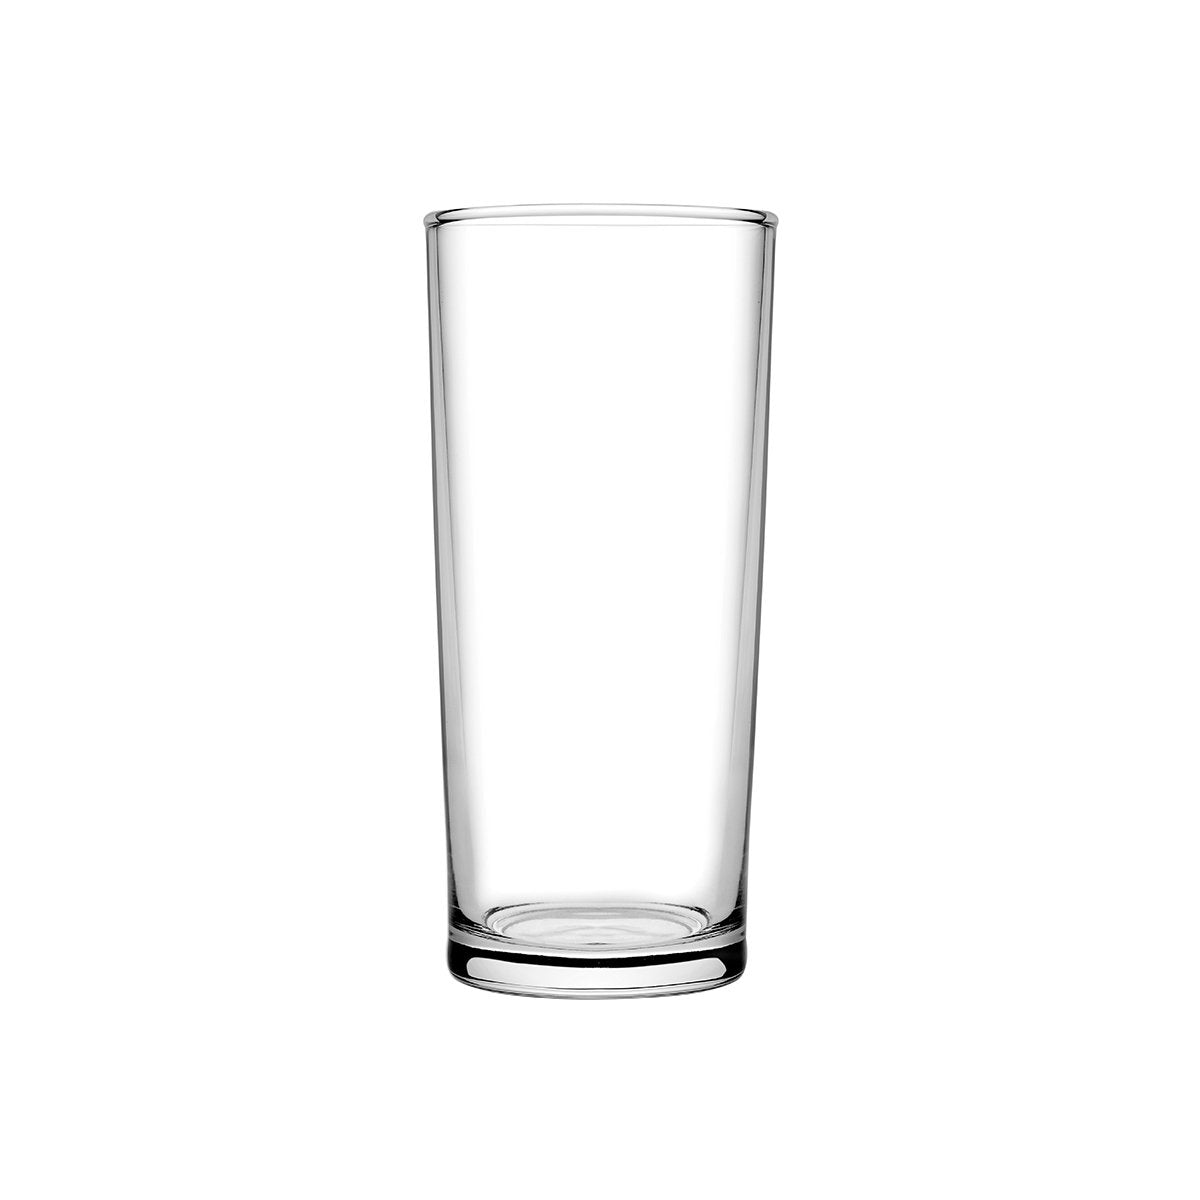 Senator, Beer (Certified, Fully Tempered, Nucleated Base), 570ml, 80mm, 180mm, To suit: PDR5250-3, Crown Glassware